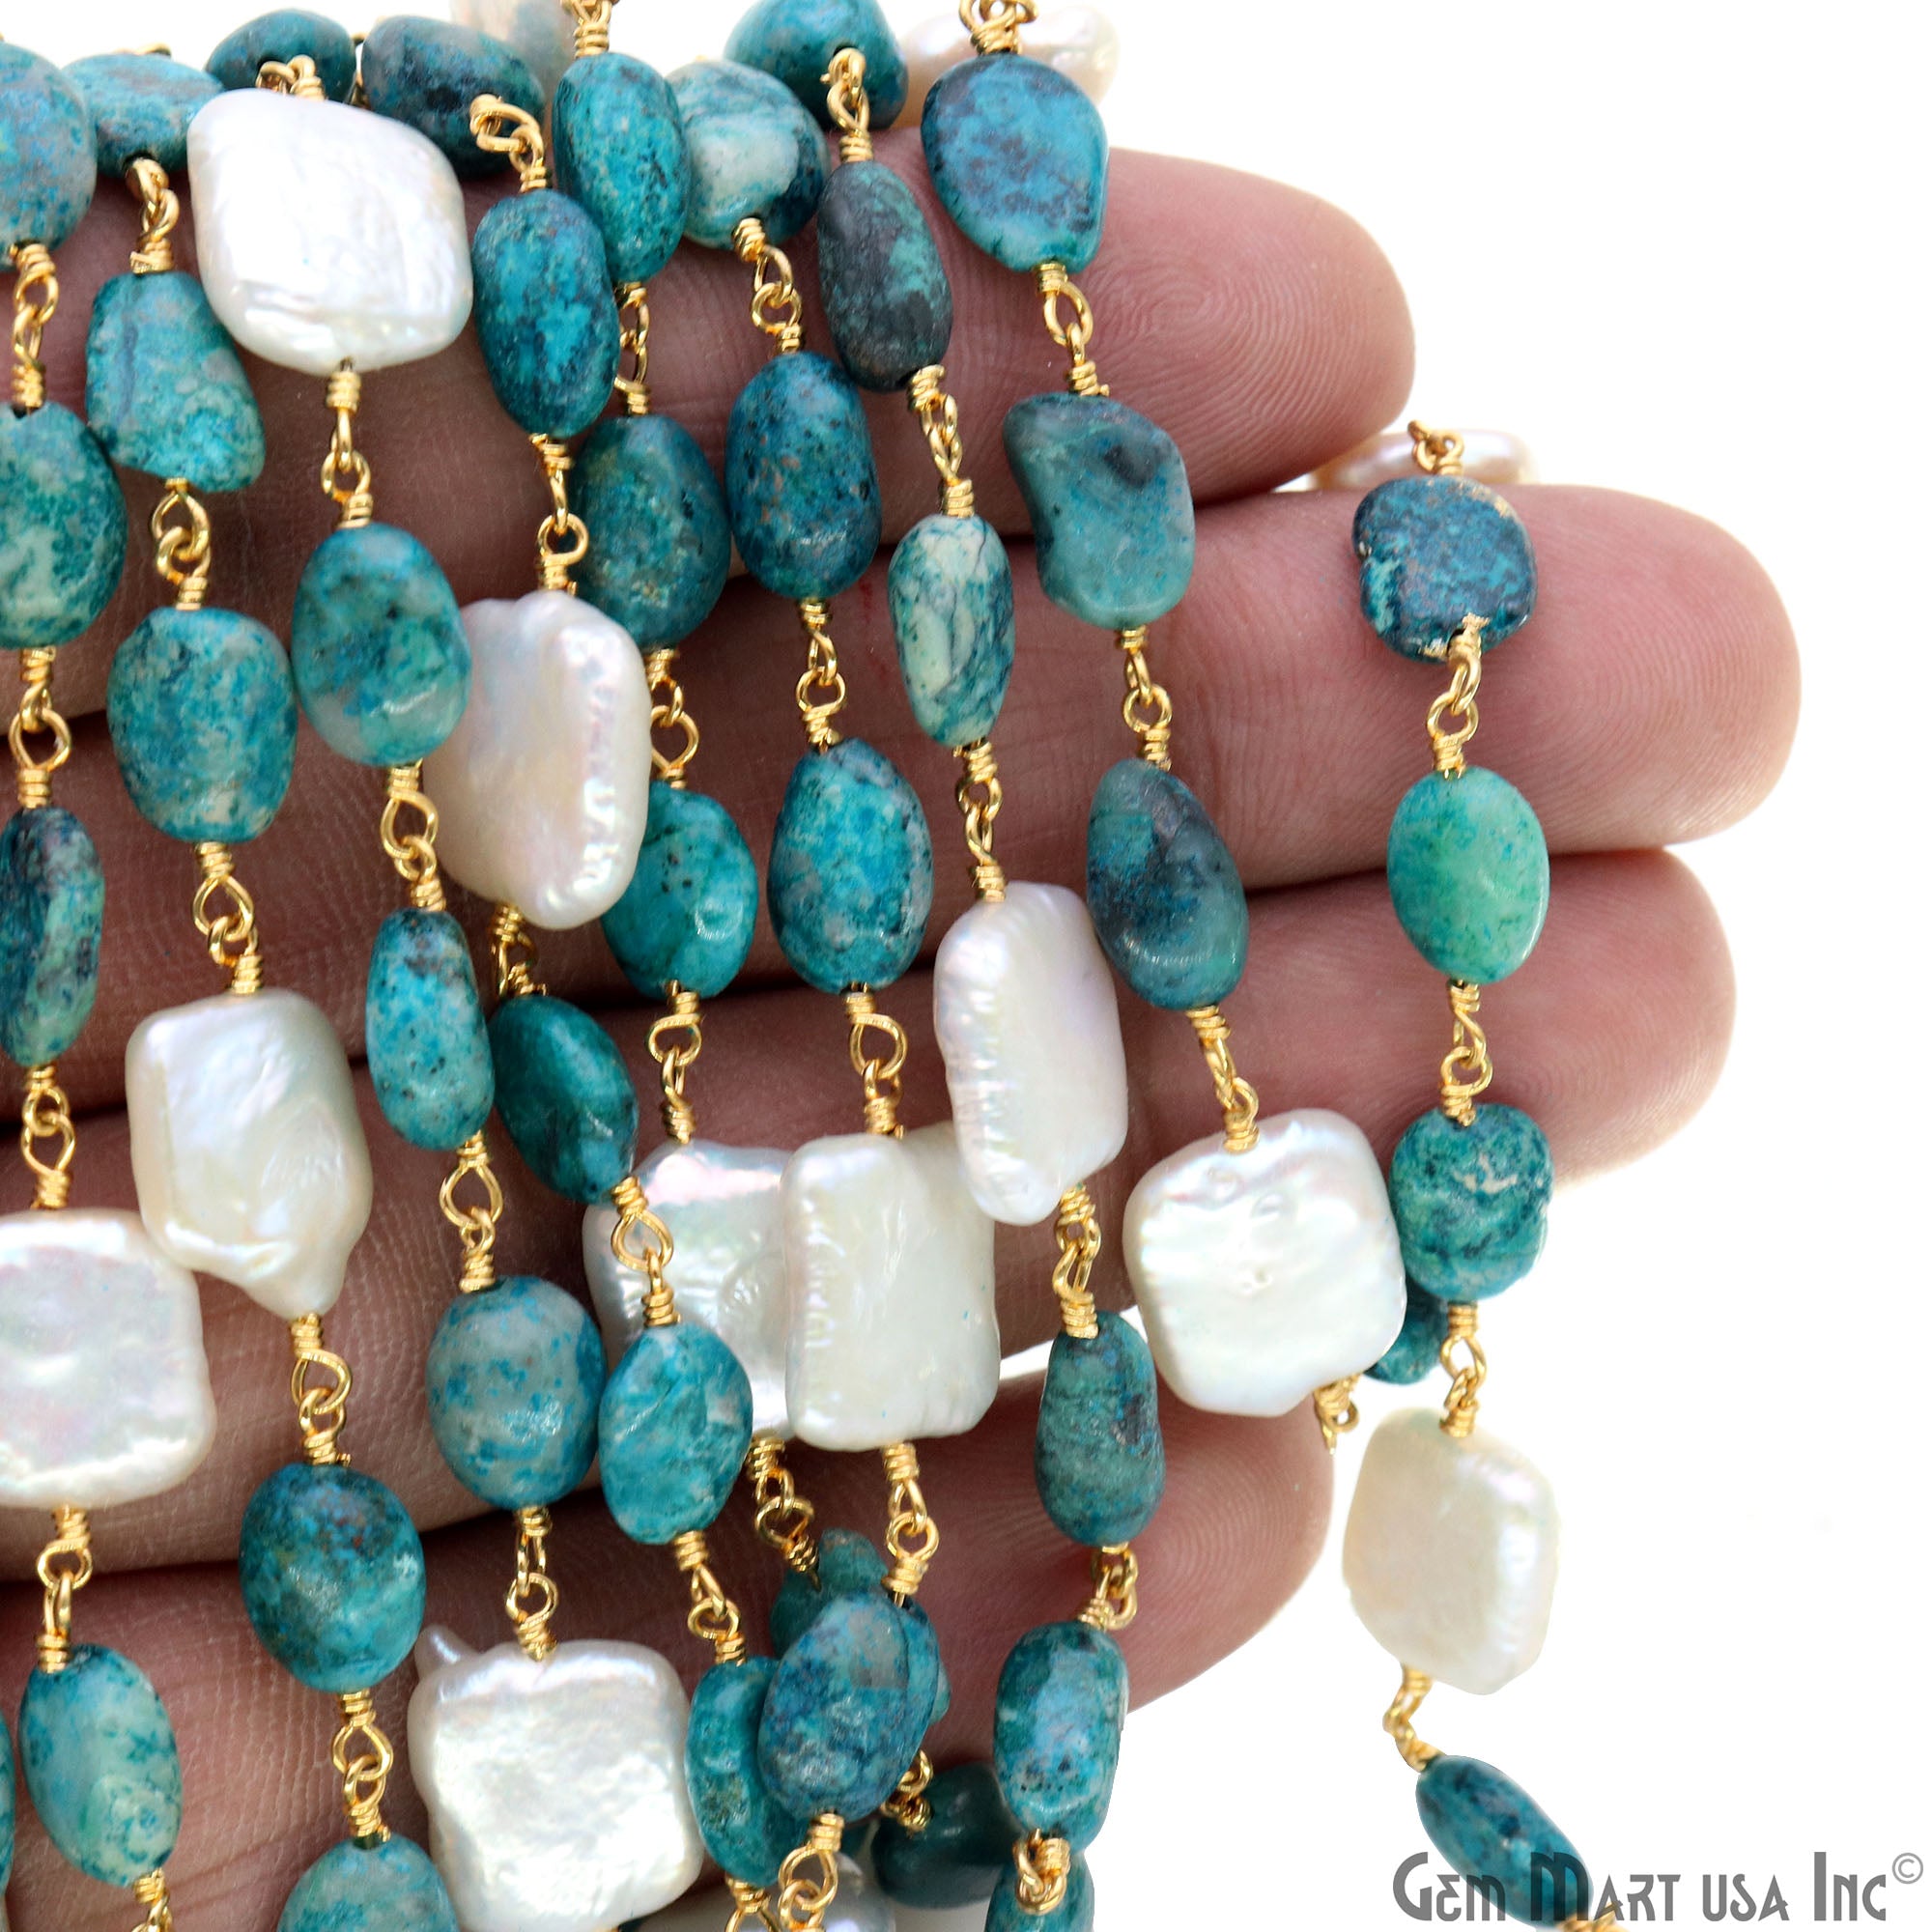 Chrysocolla Tumble Beads 8x5mm & Pearl 12mm Beads Gold Plated Rosary Chain